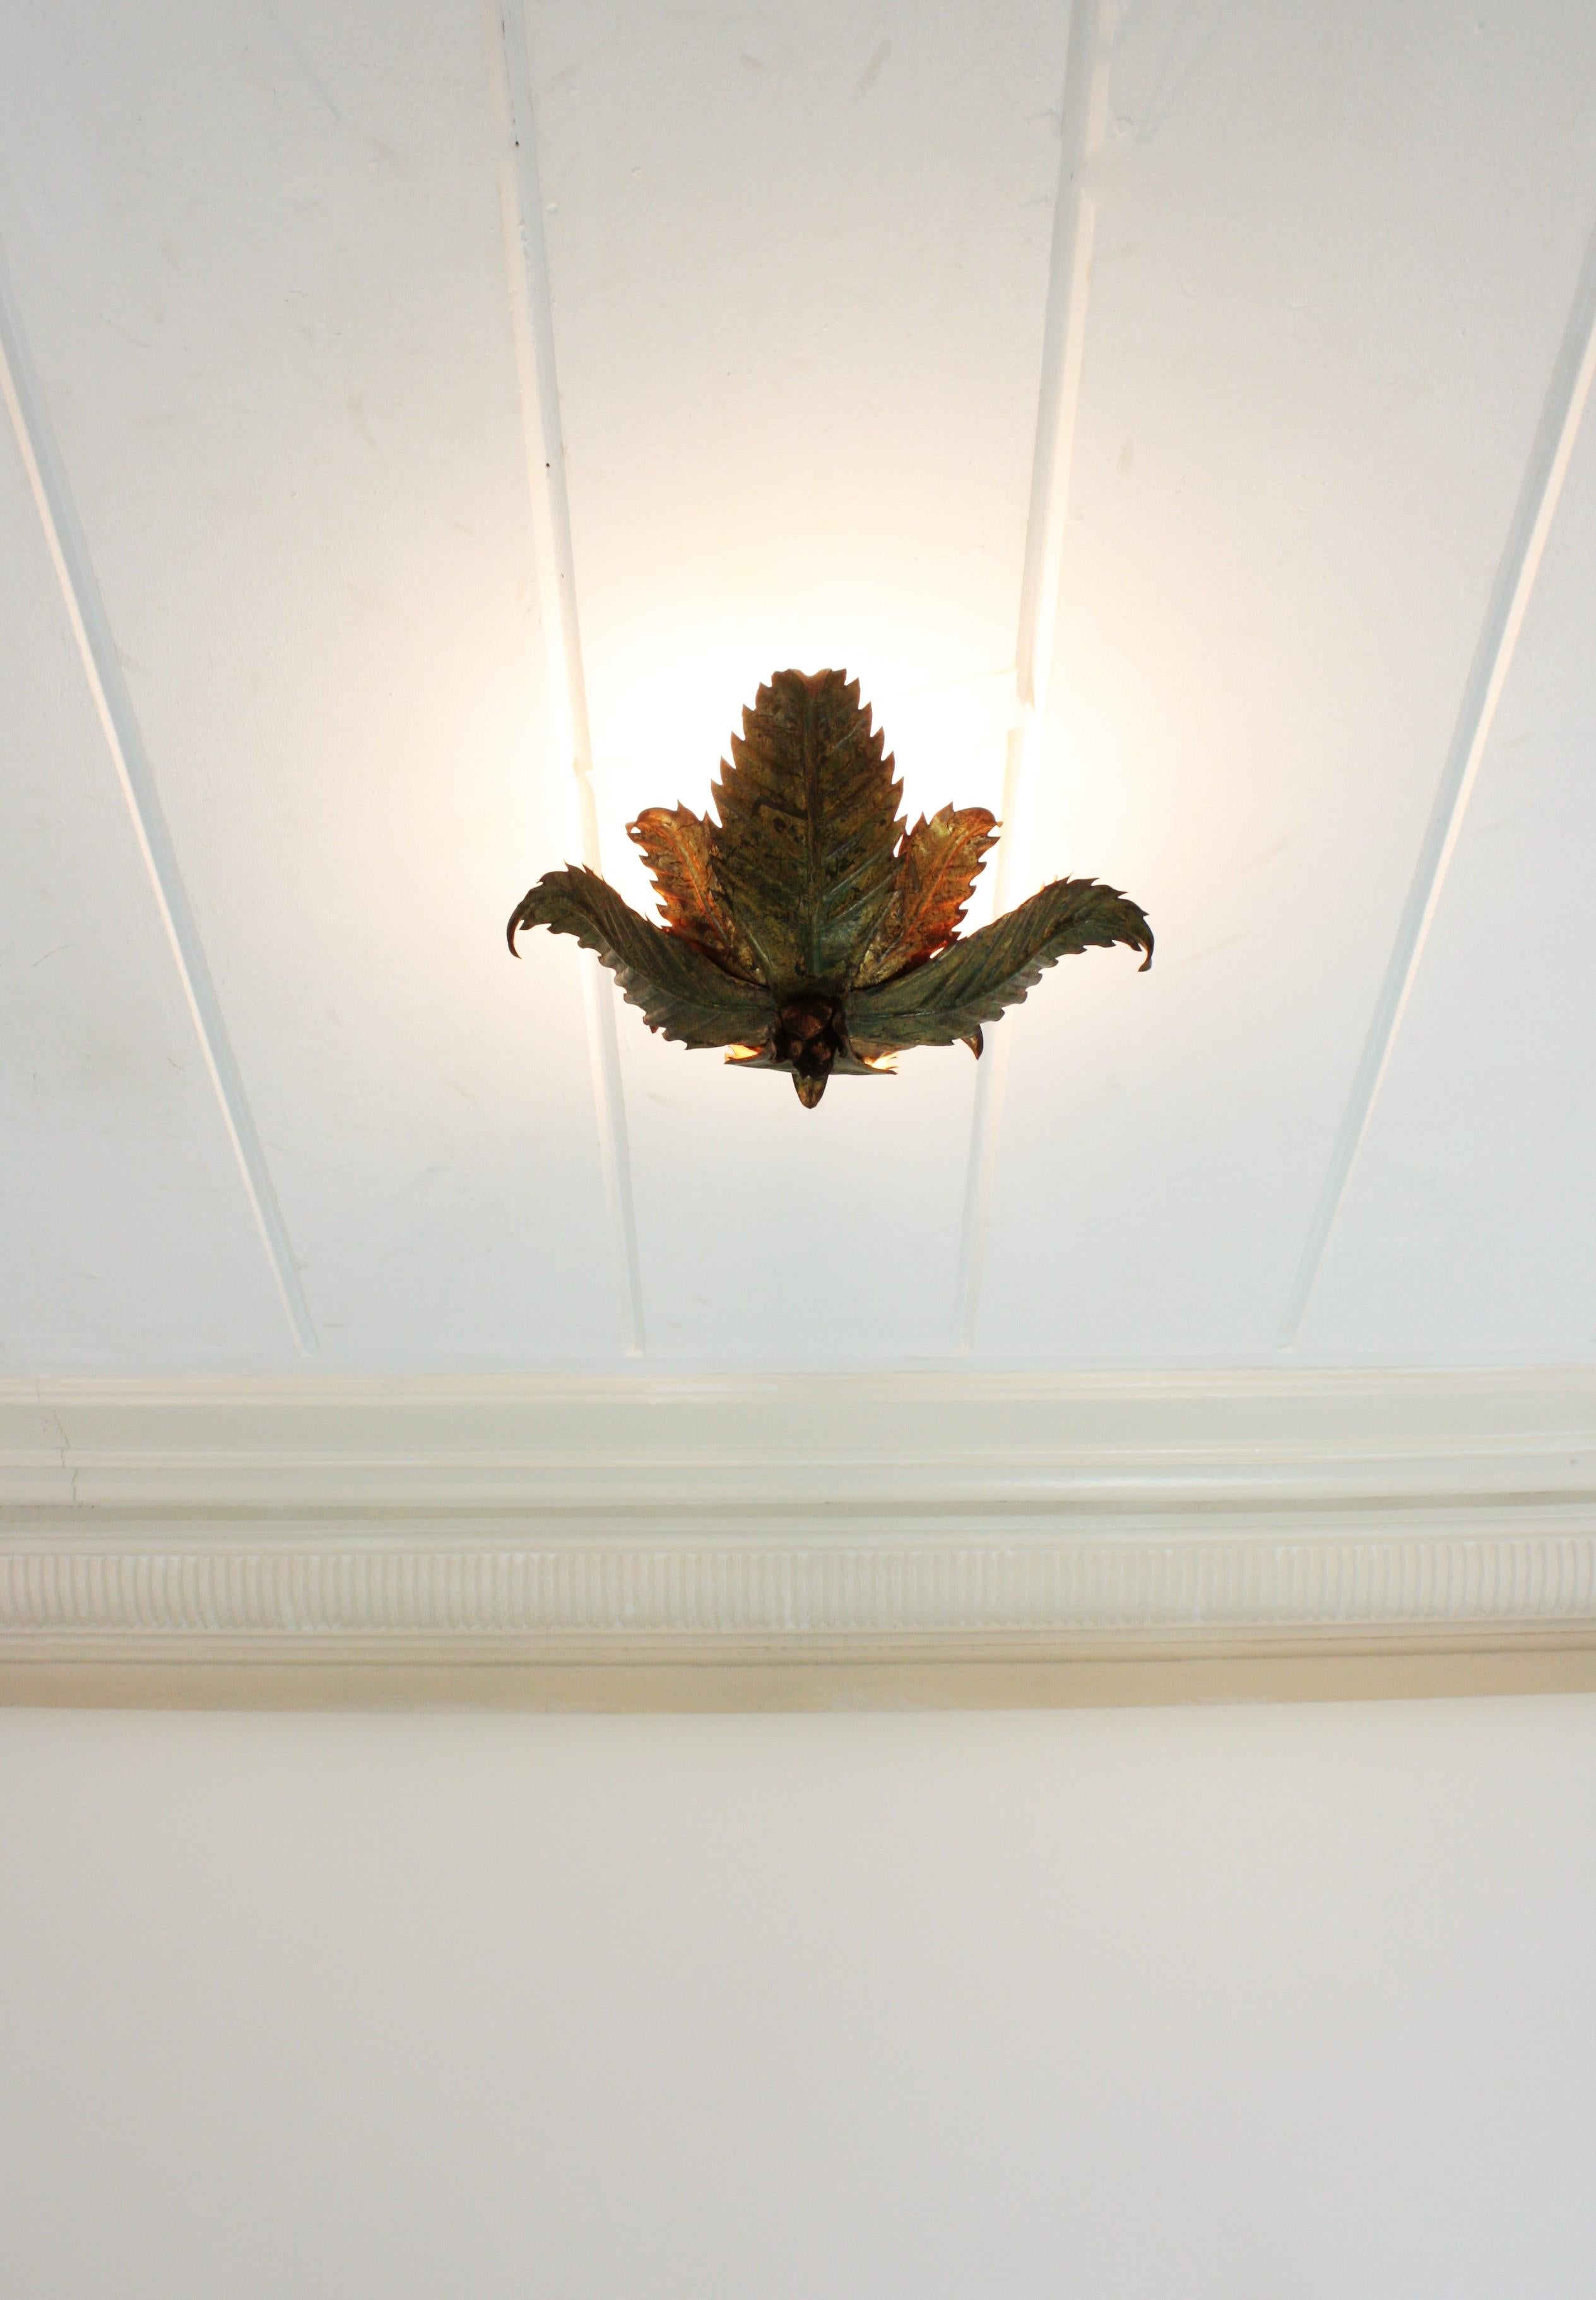 20th Century Sunburst Foliage Floral Light Fixture in Two-Tone Gilt Wrought Iron, 1950s For Sale